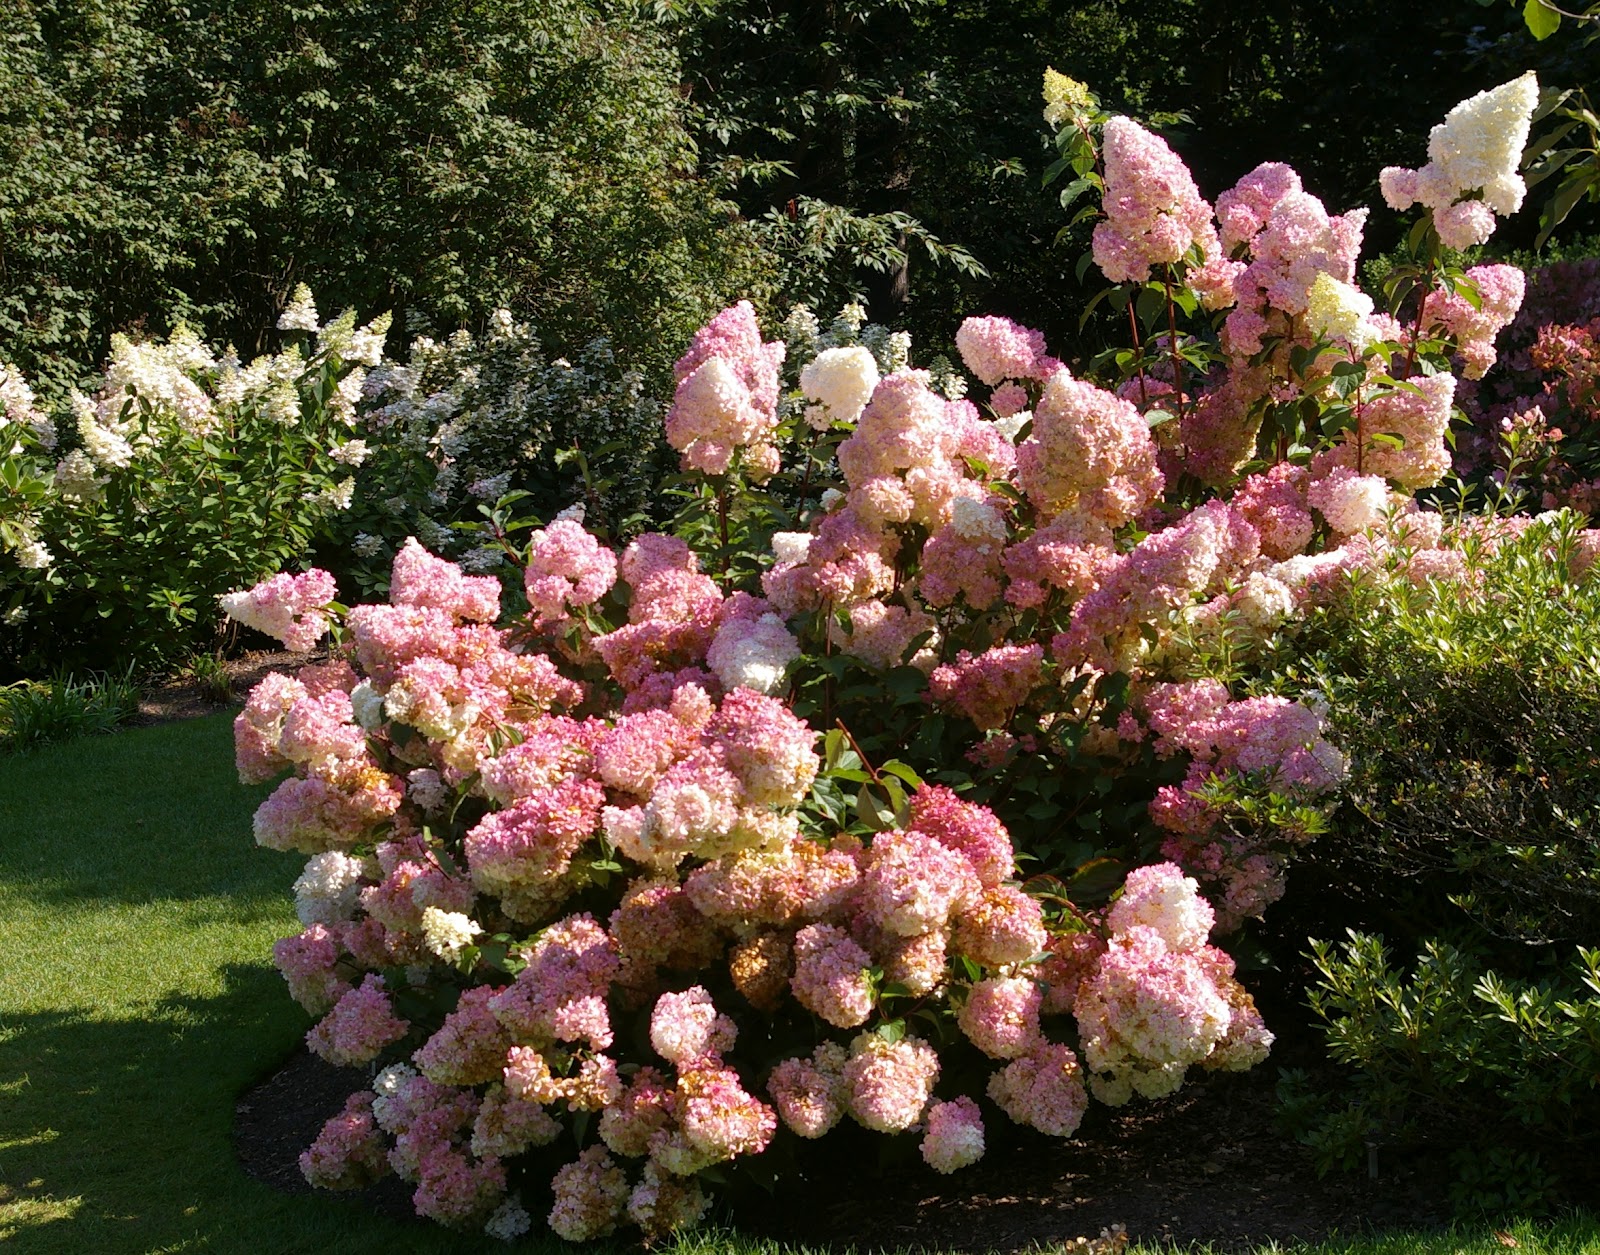 Hydrangea paniculata Vanille Fraise was proposed and recommended for 